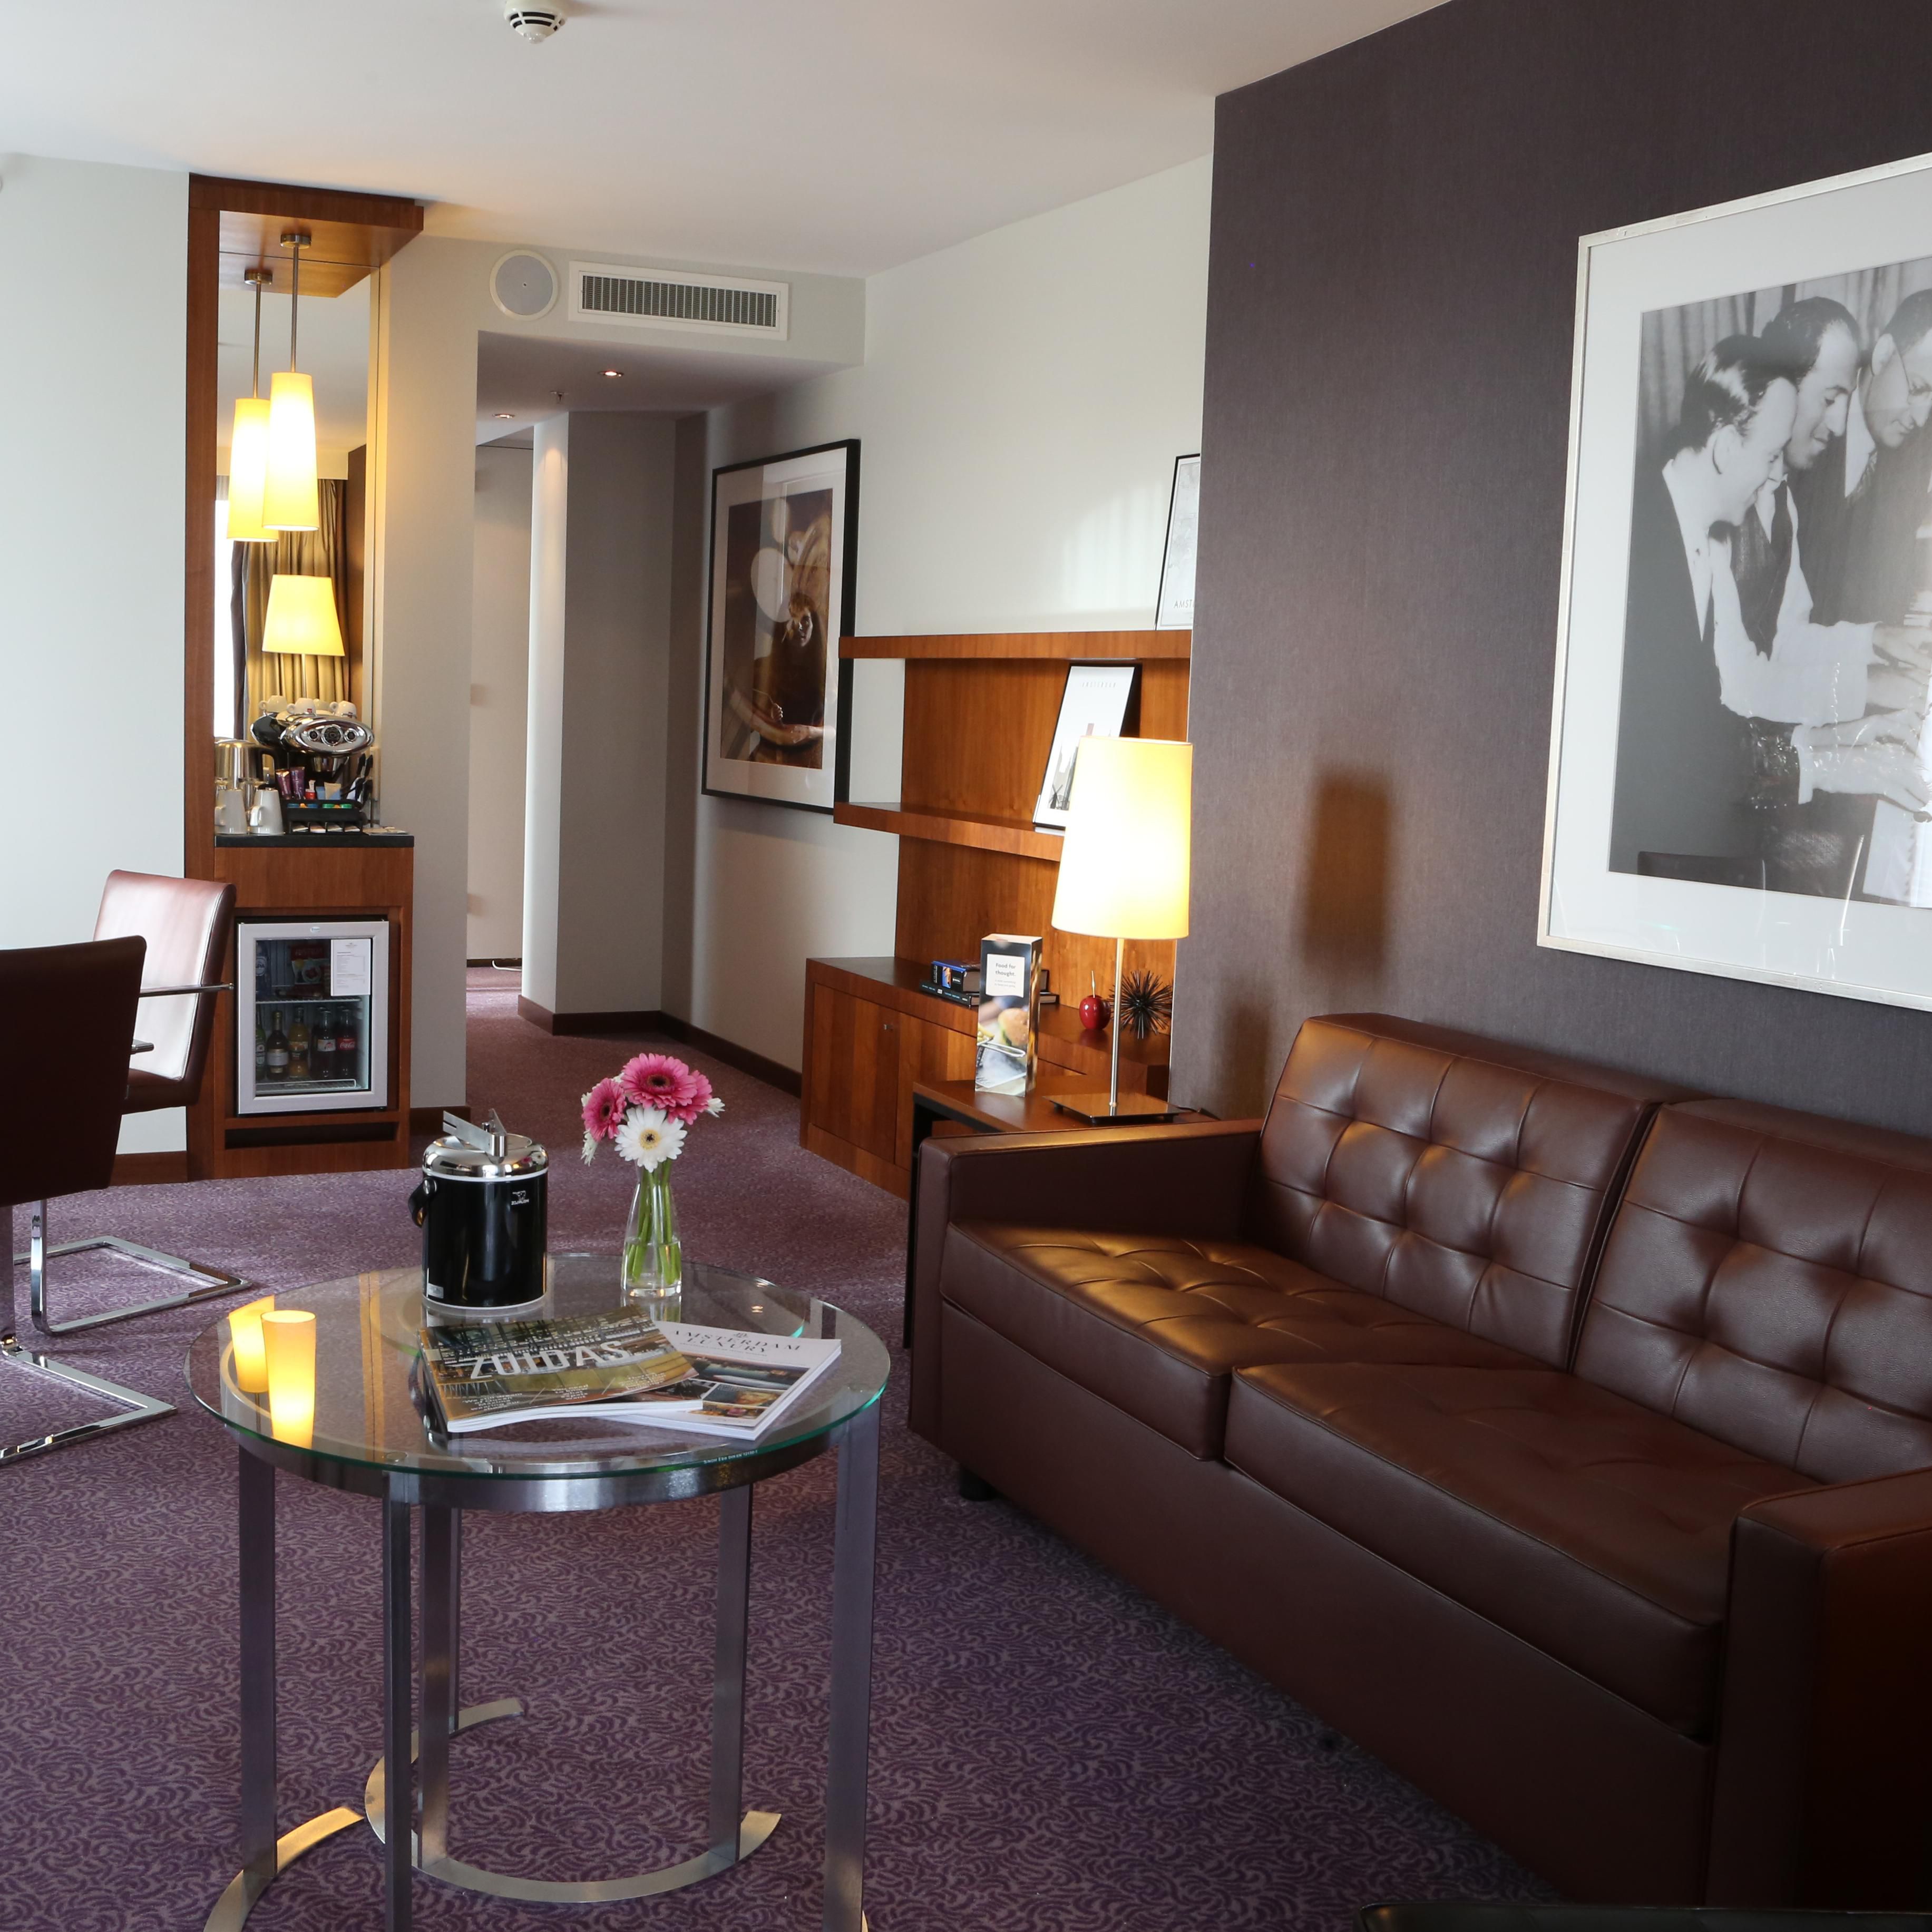 One of the largest suite at the Crowne Plaza hotel Amsterdam South